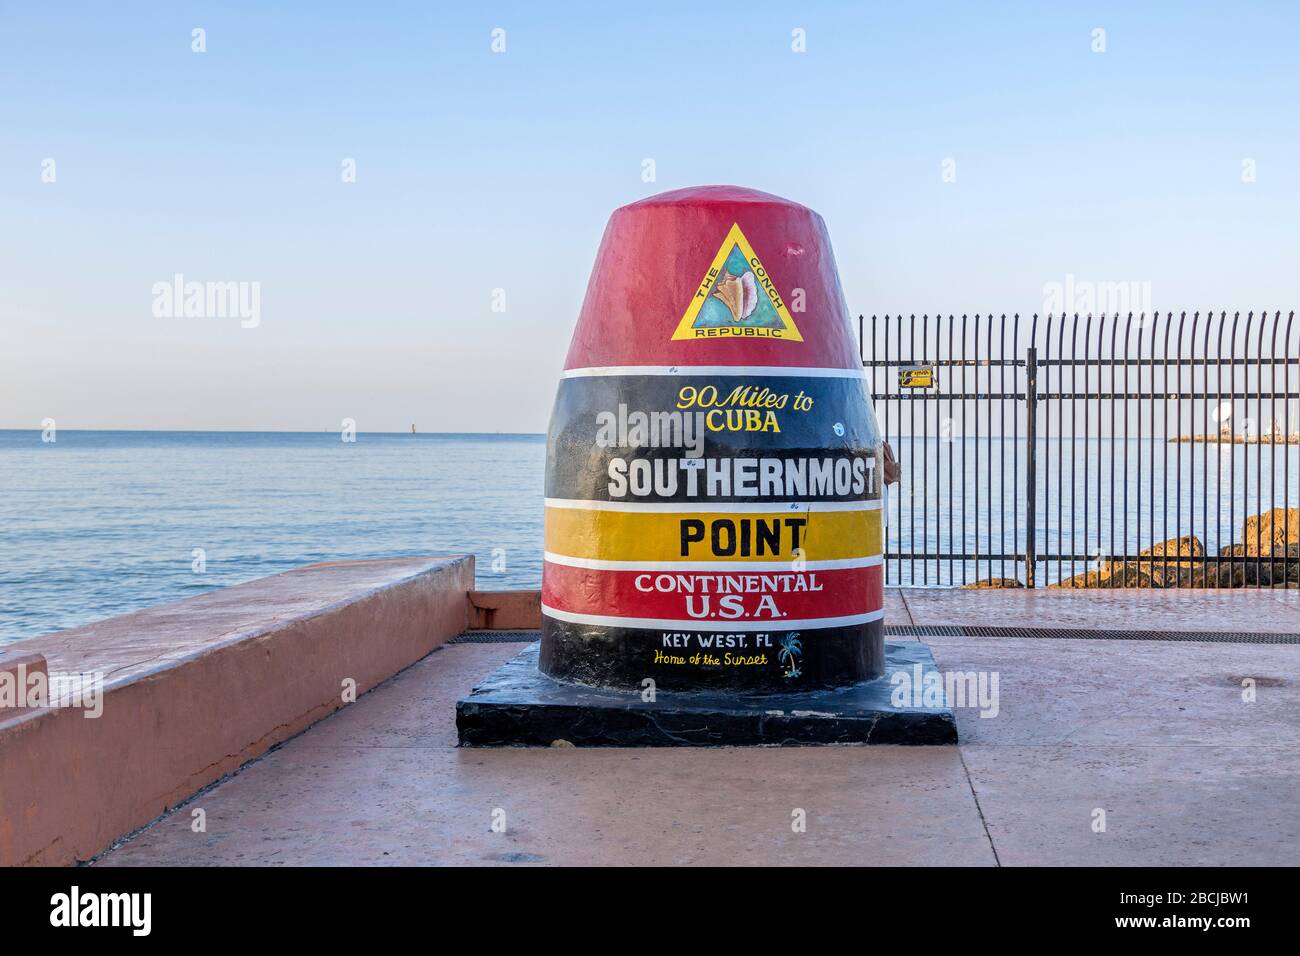 Southernmost Point, a popular tourist attraction in Key West, Florida, with no tourists around. Stock Photo